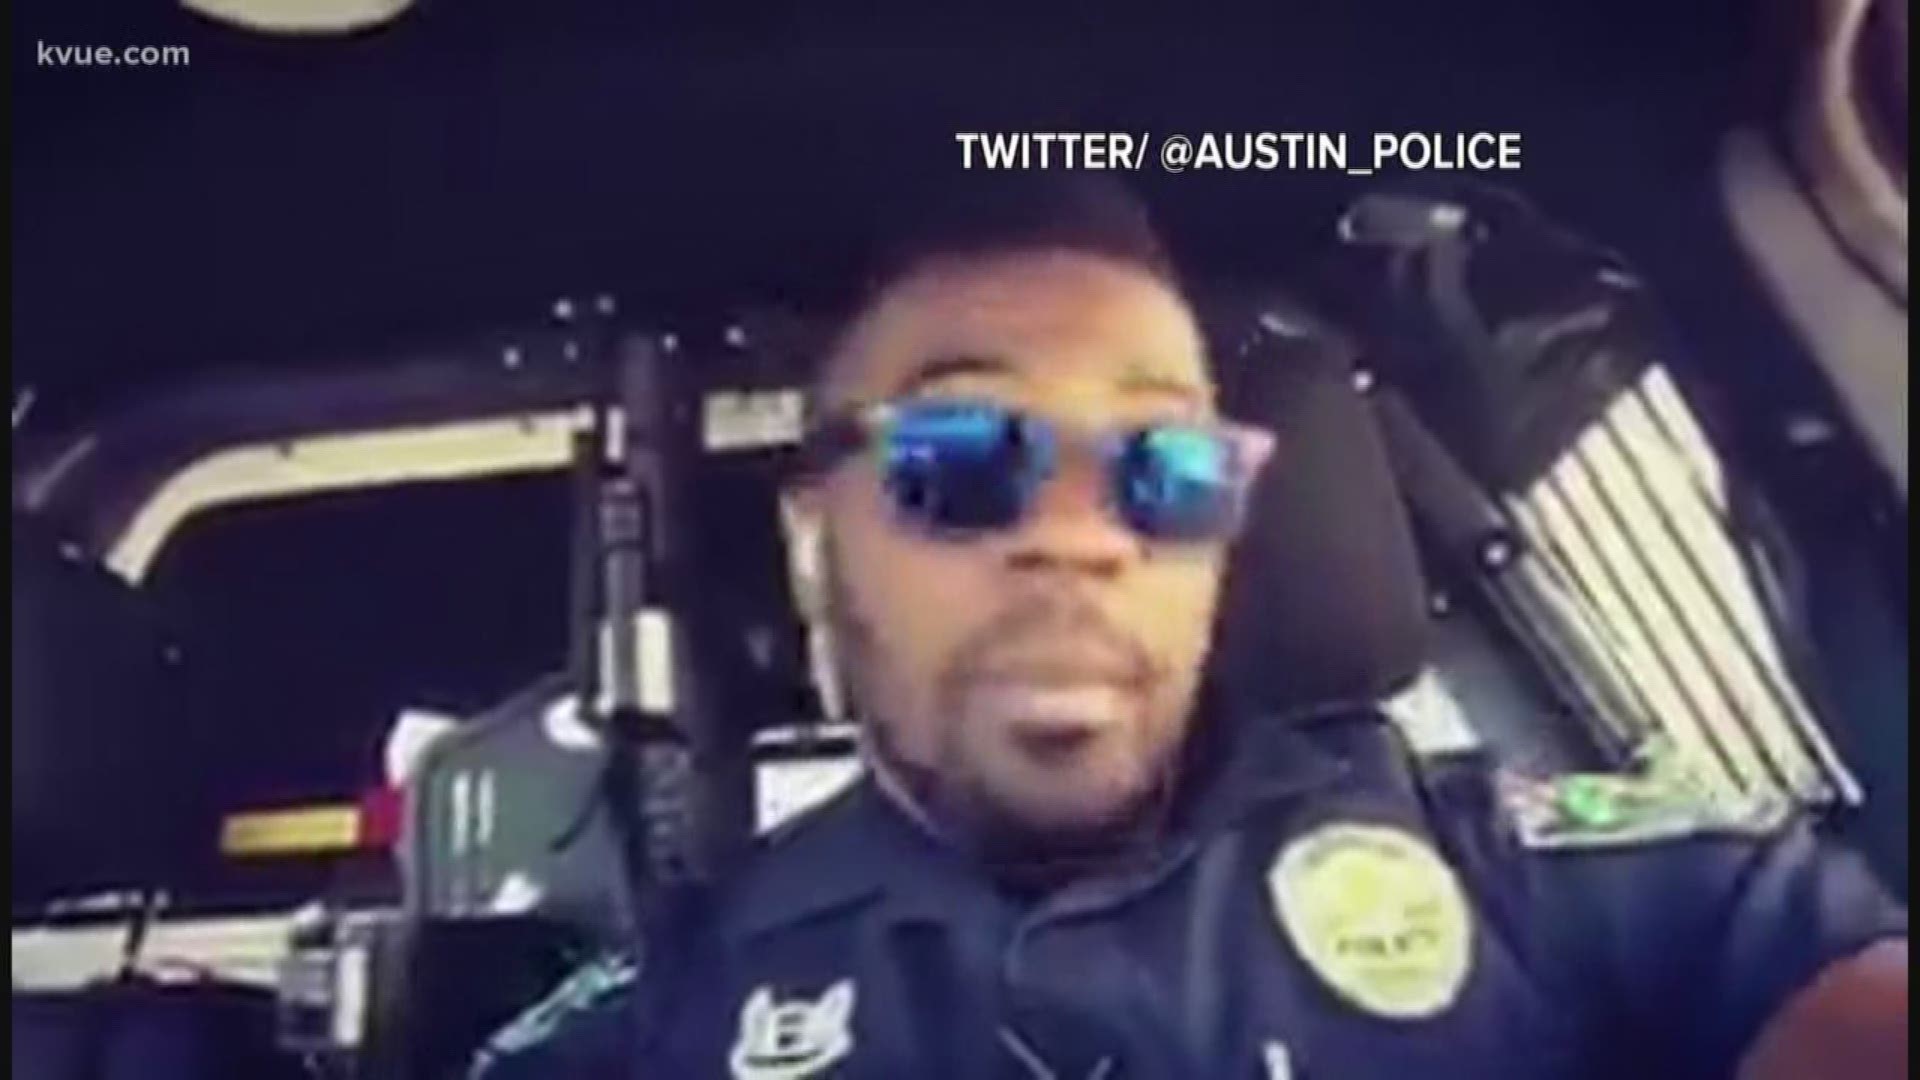 Deputies from across Central Texas are taking part in the "Lip Sync Battle" craze that has taken over the internet.